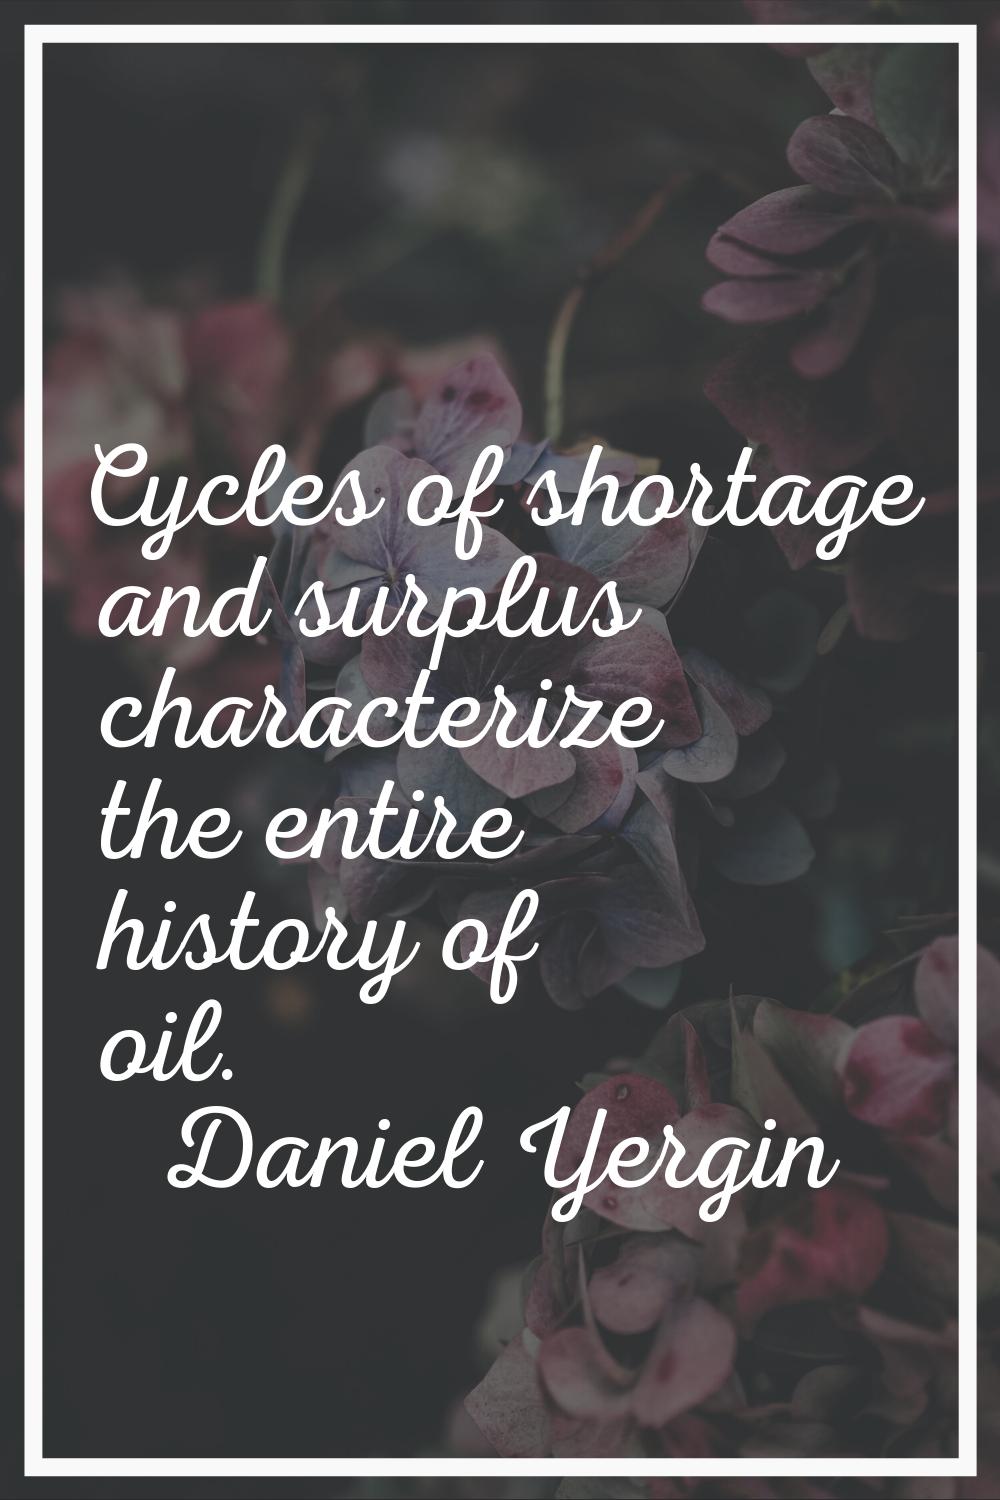 Cycles of shortage and surplus characterize the entire history of oil.